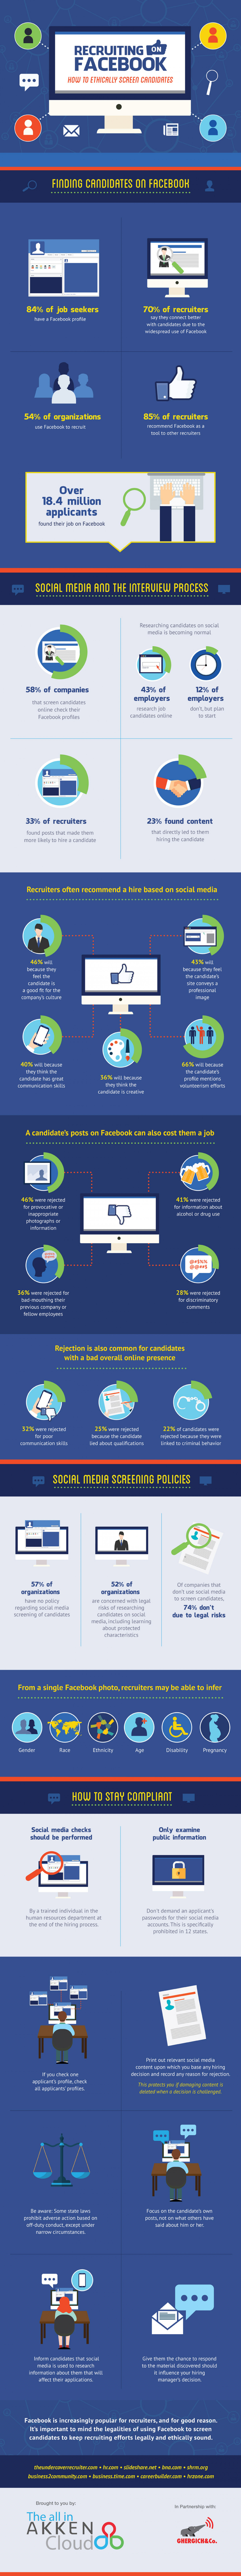 Recruiting on Facebook: How to Ethically Screen Candidates Infographic